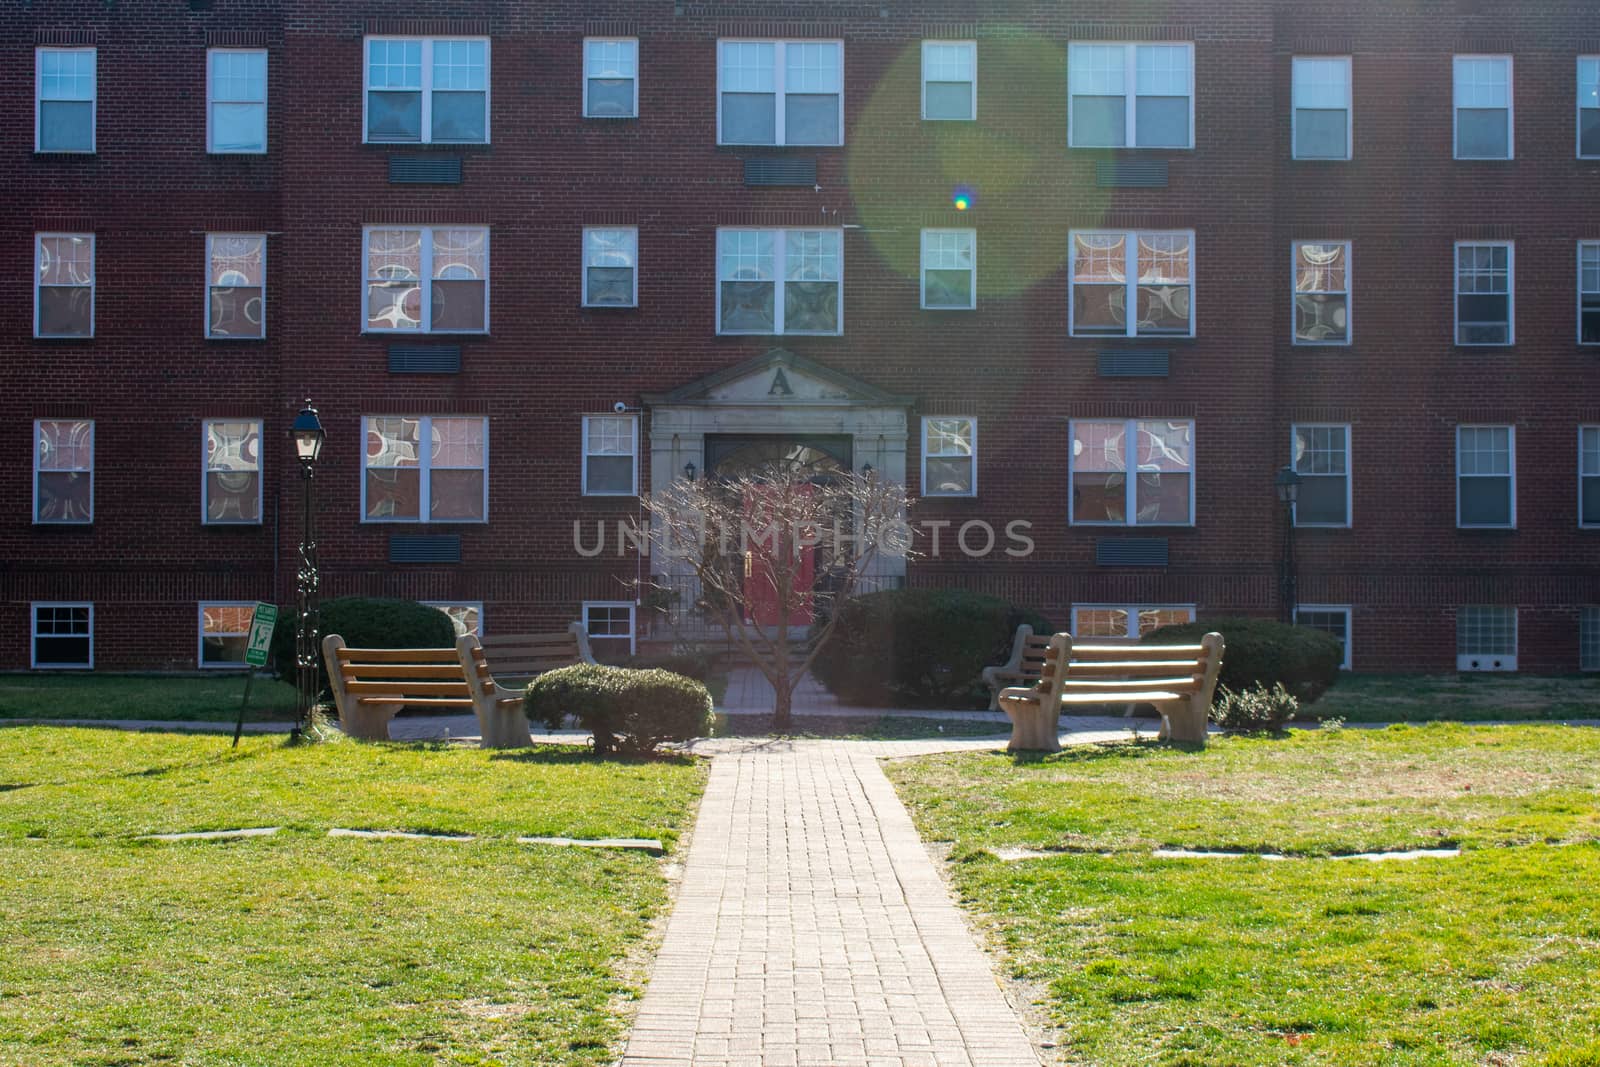 The Courtyard of a Brick Apartment Building on a Sunny Day